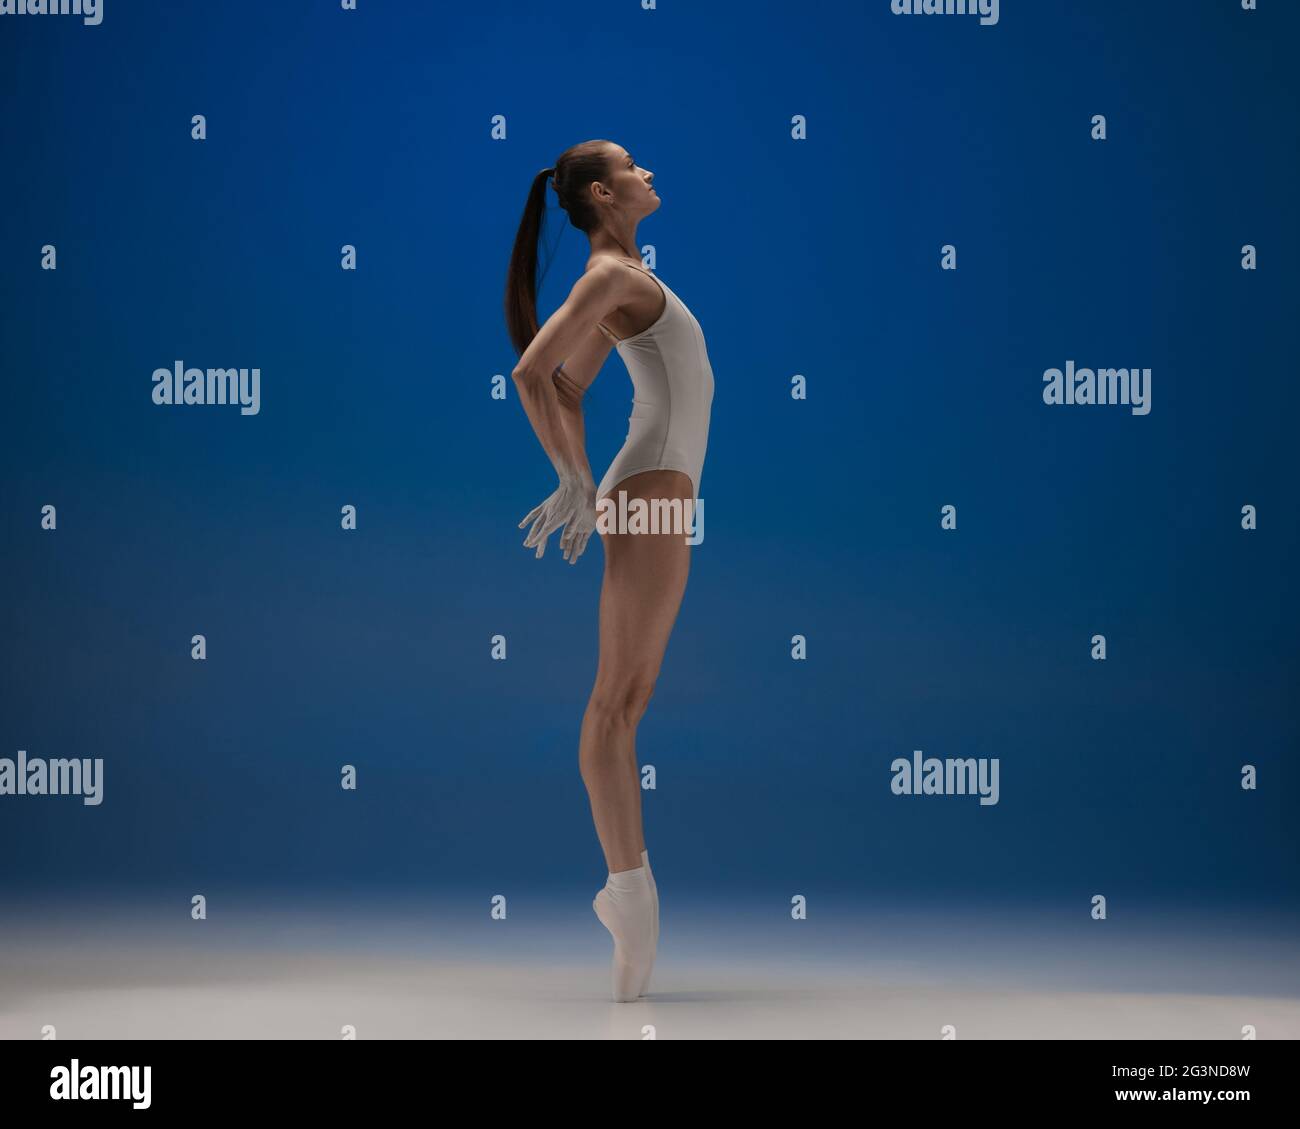 On the tips of toes. Young beautiful ballerina in action isolated over blue background. Stock Photo